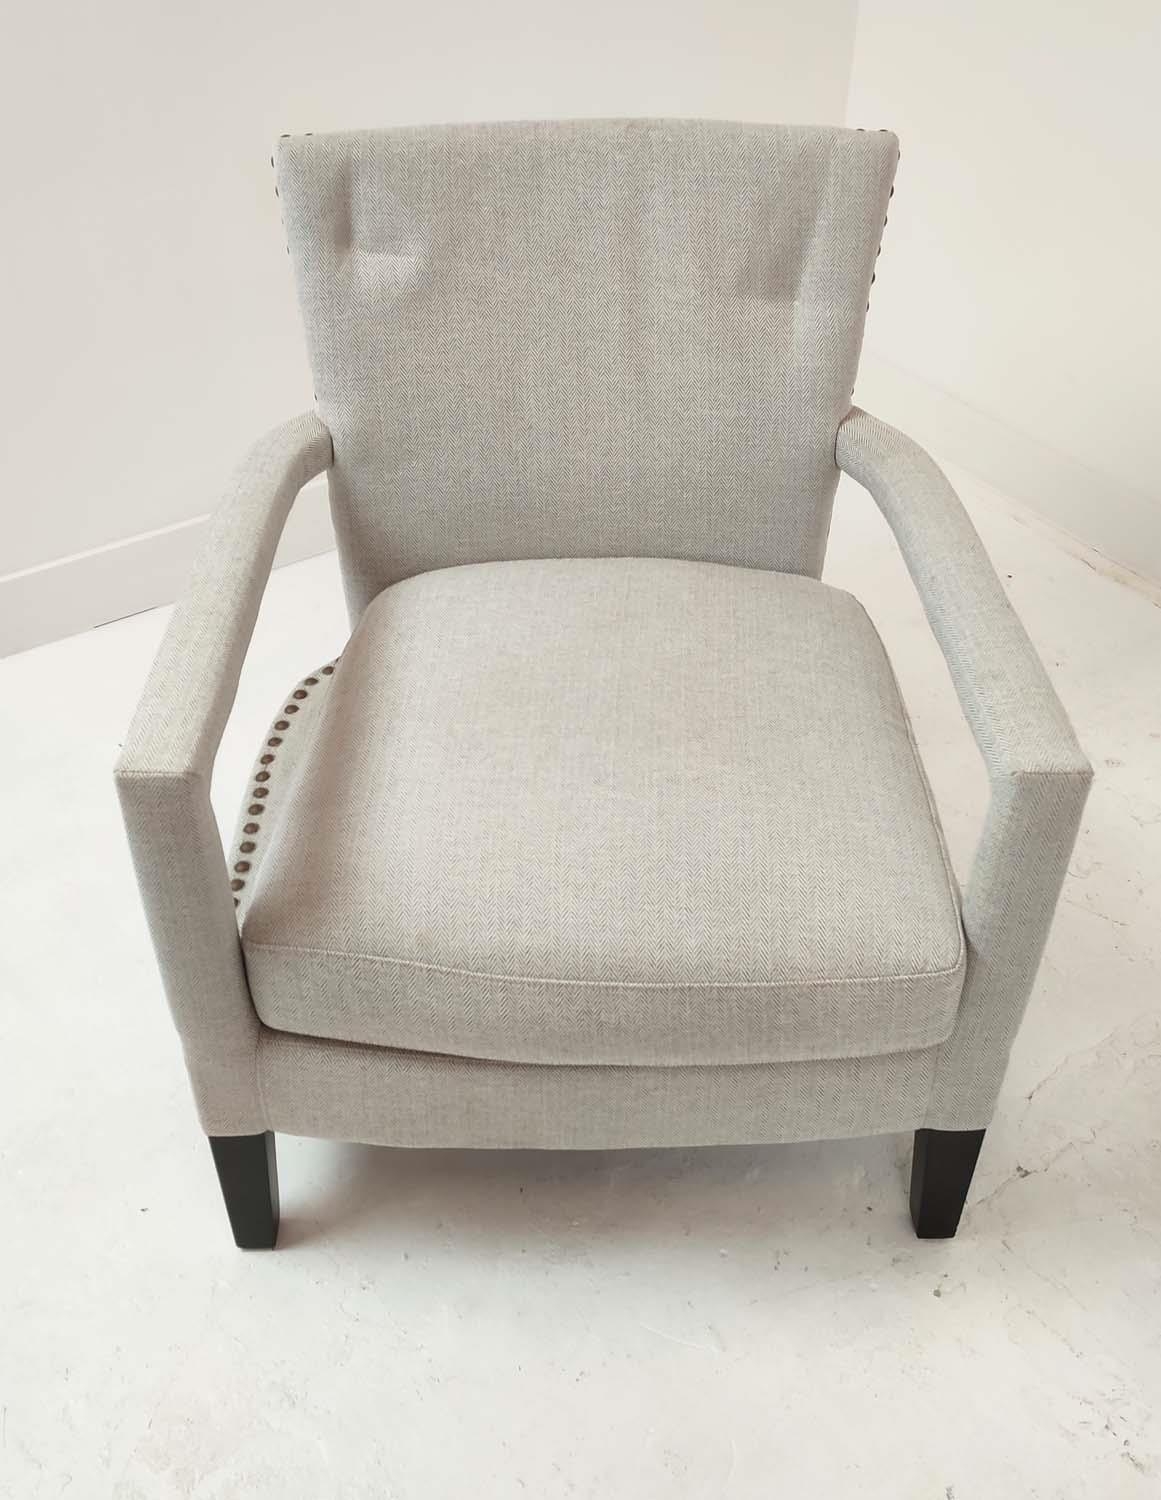 EICHHOLTZ ARMCHAIRS, a pair, light grey upholstery with studded detail, 80cm H x 70cm W x 80cm D. ( - Image 3 of 7